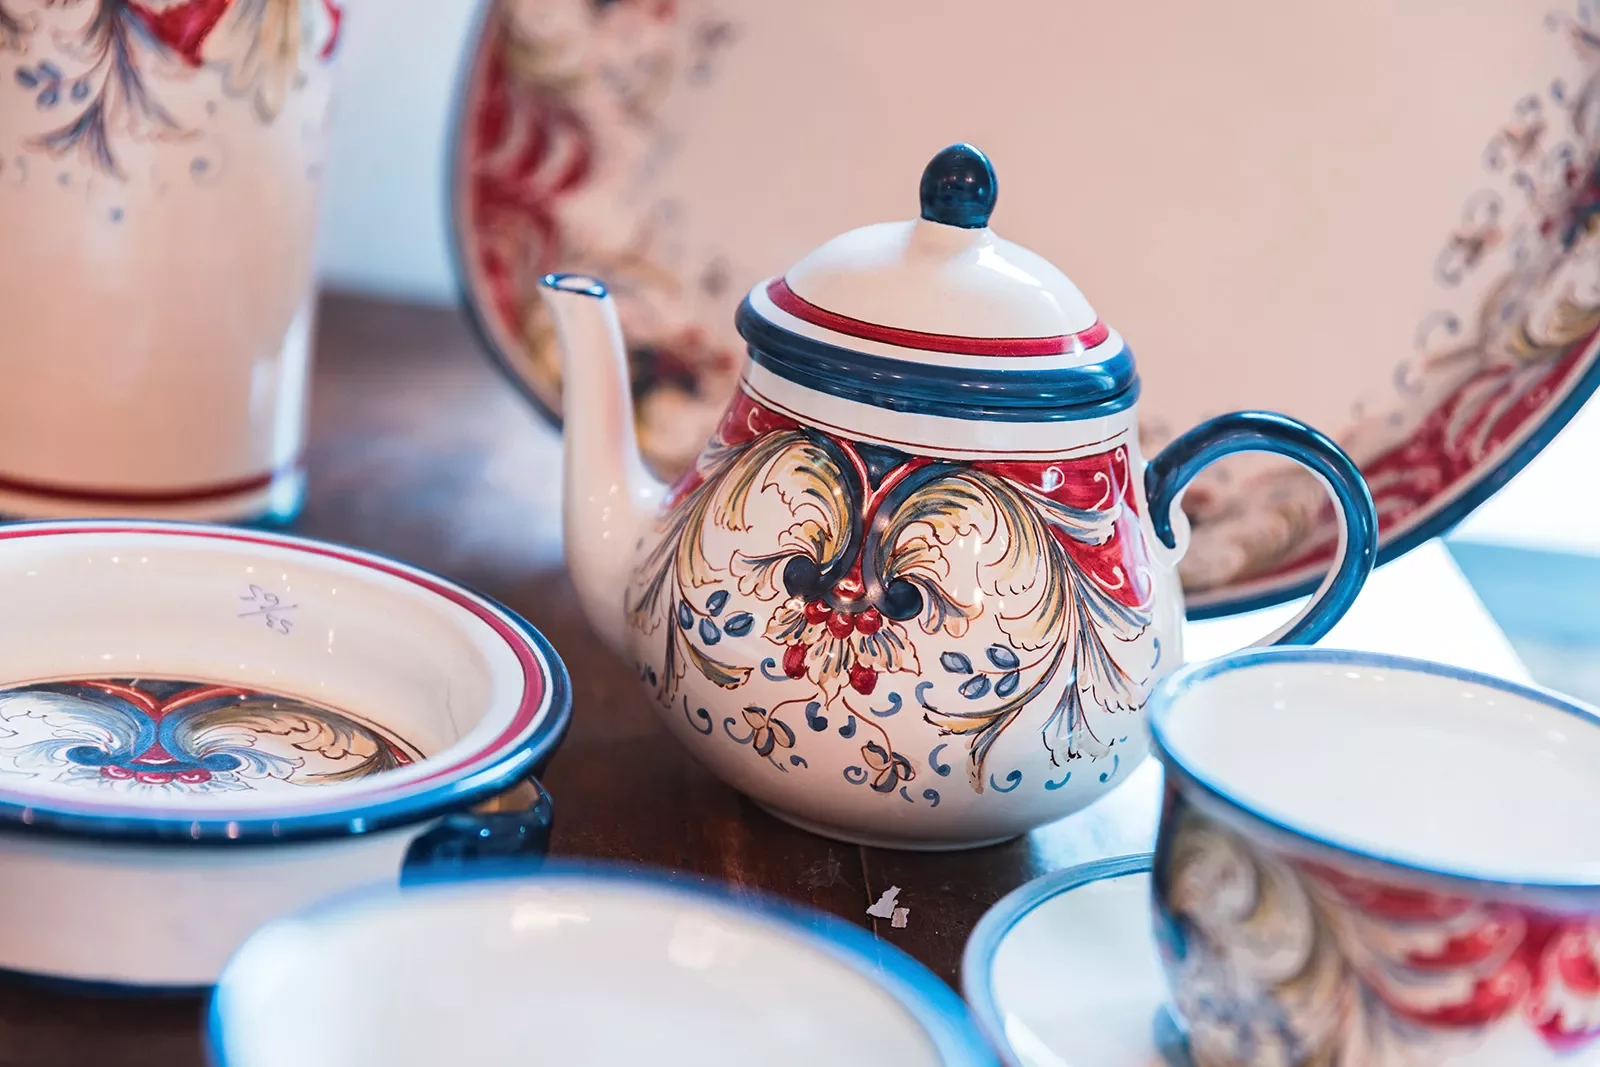 red, white and blue teapot with cups surrounding